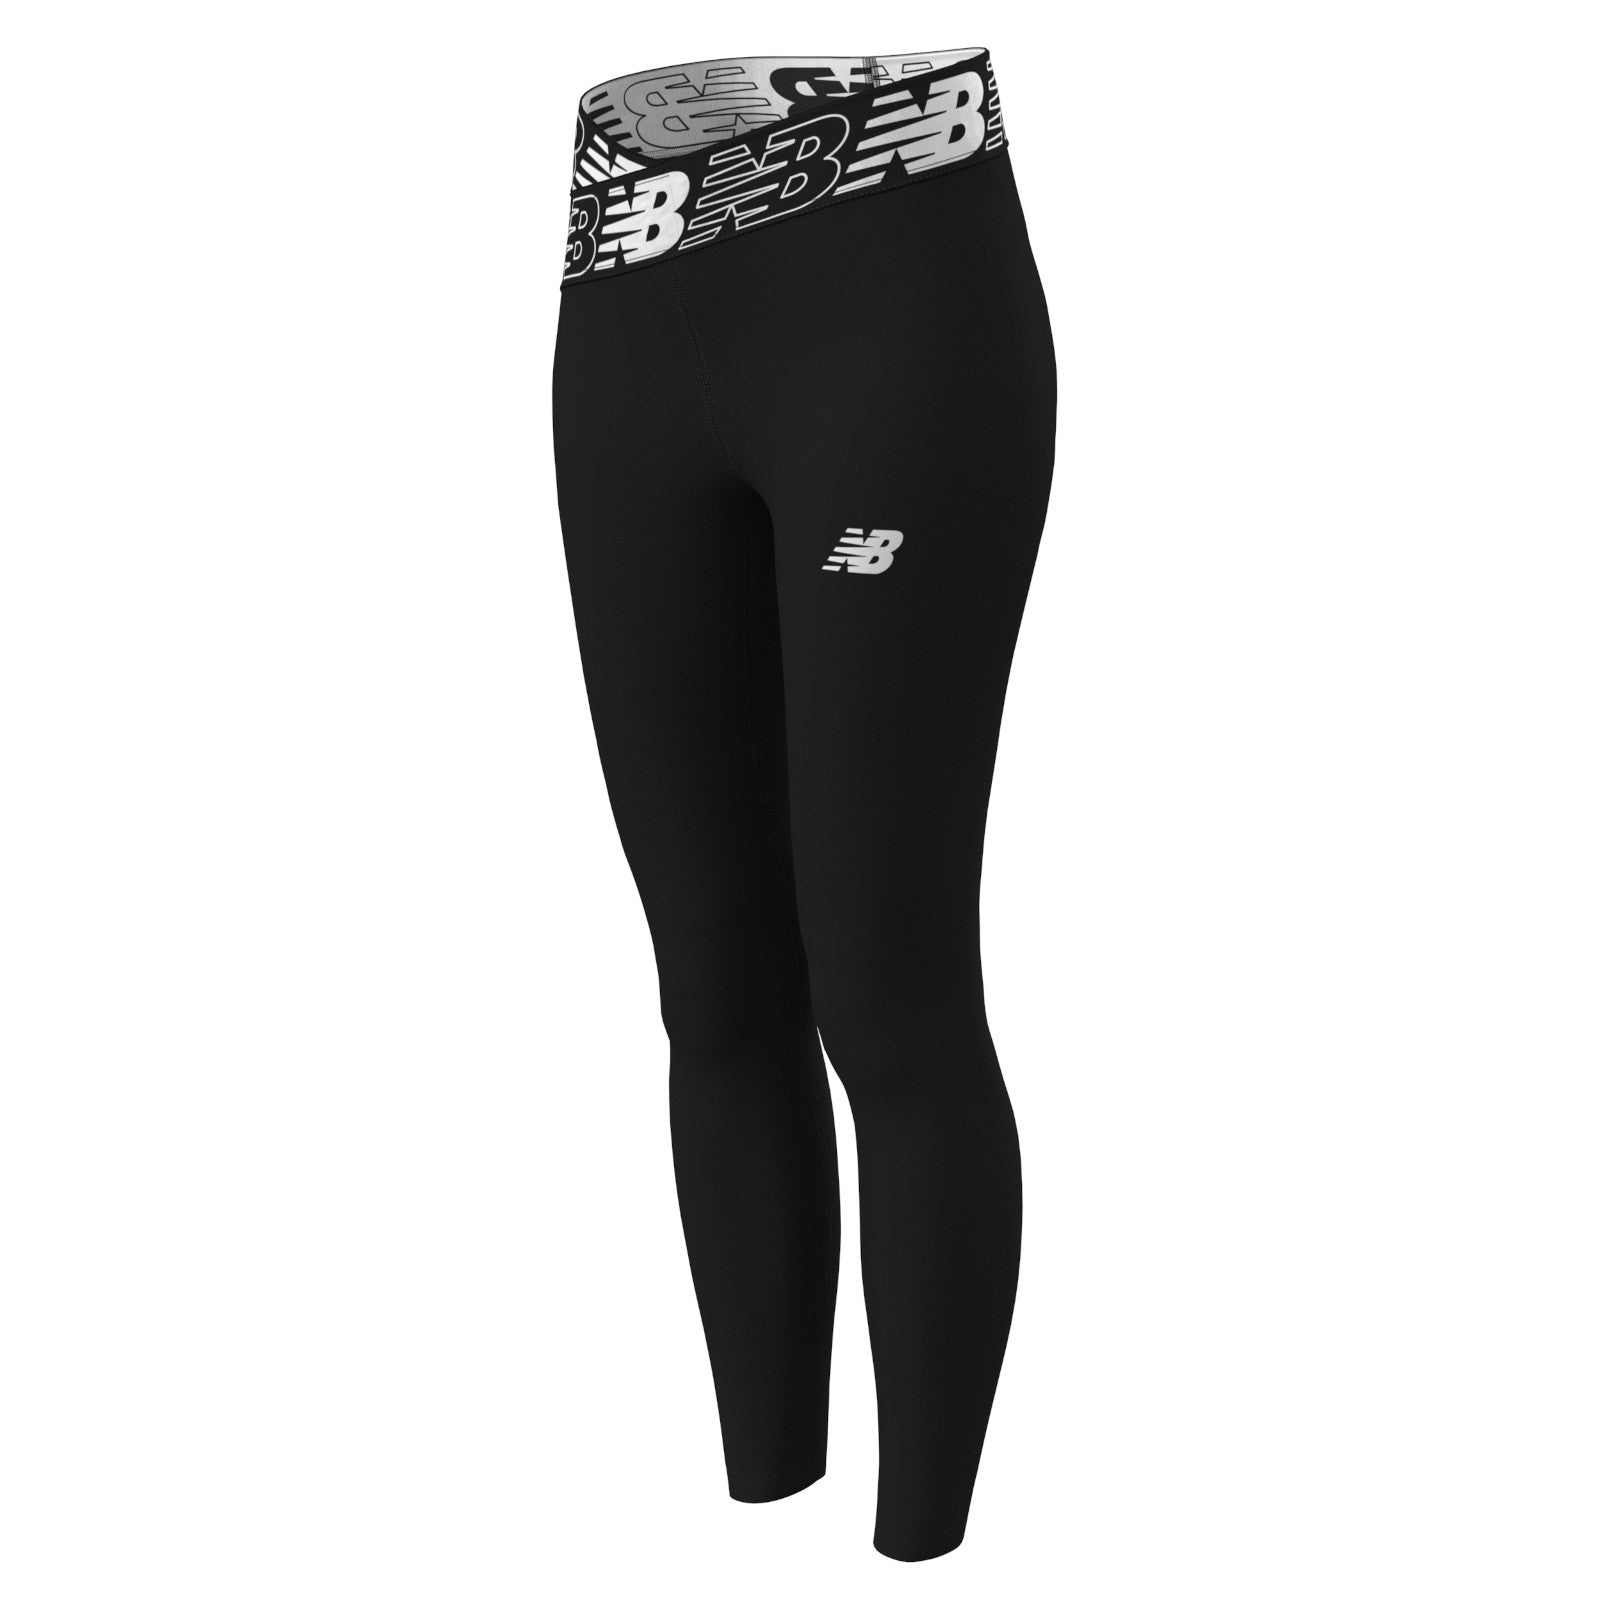 New Balance Relentless Crossover Women's High Rise 7/8 Tights